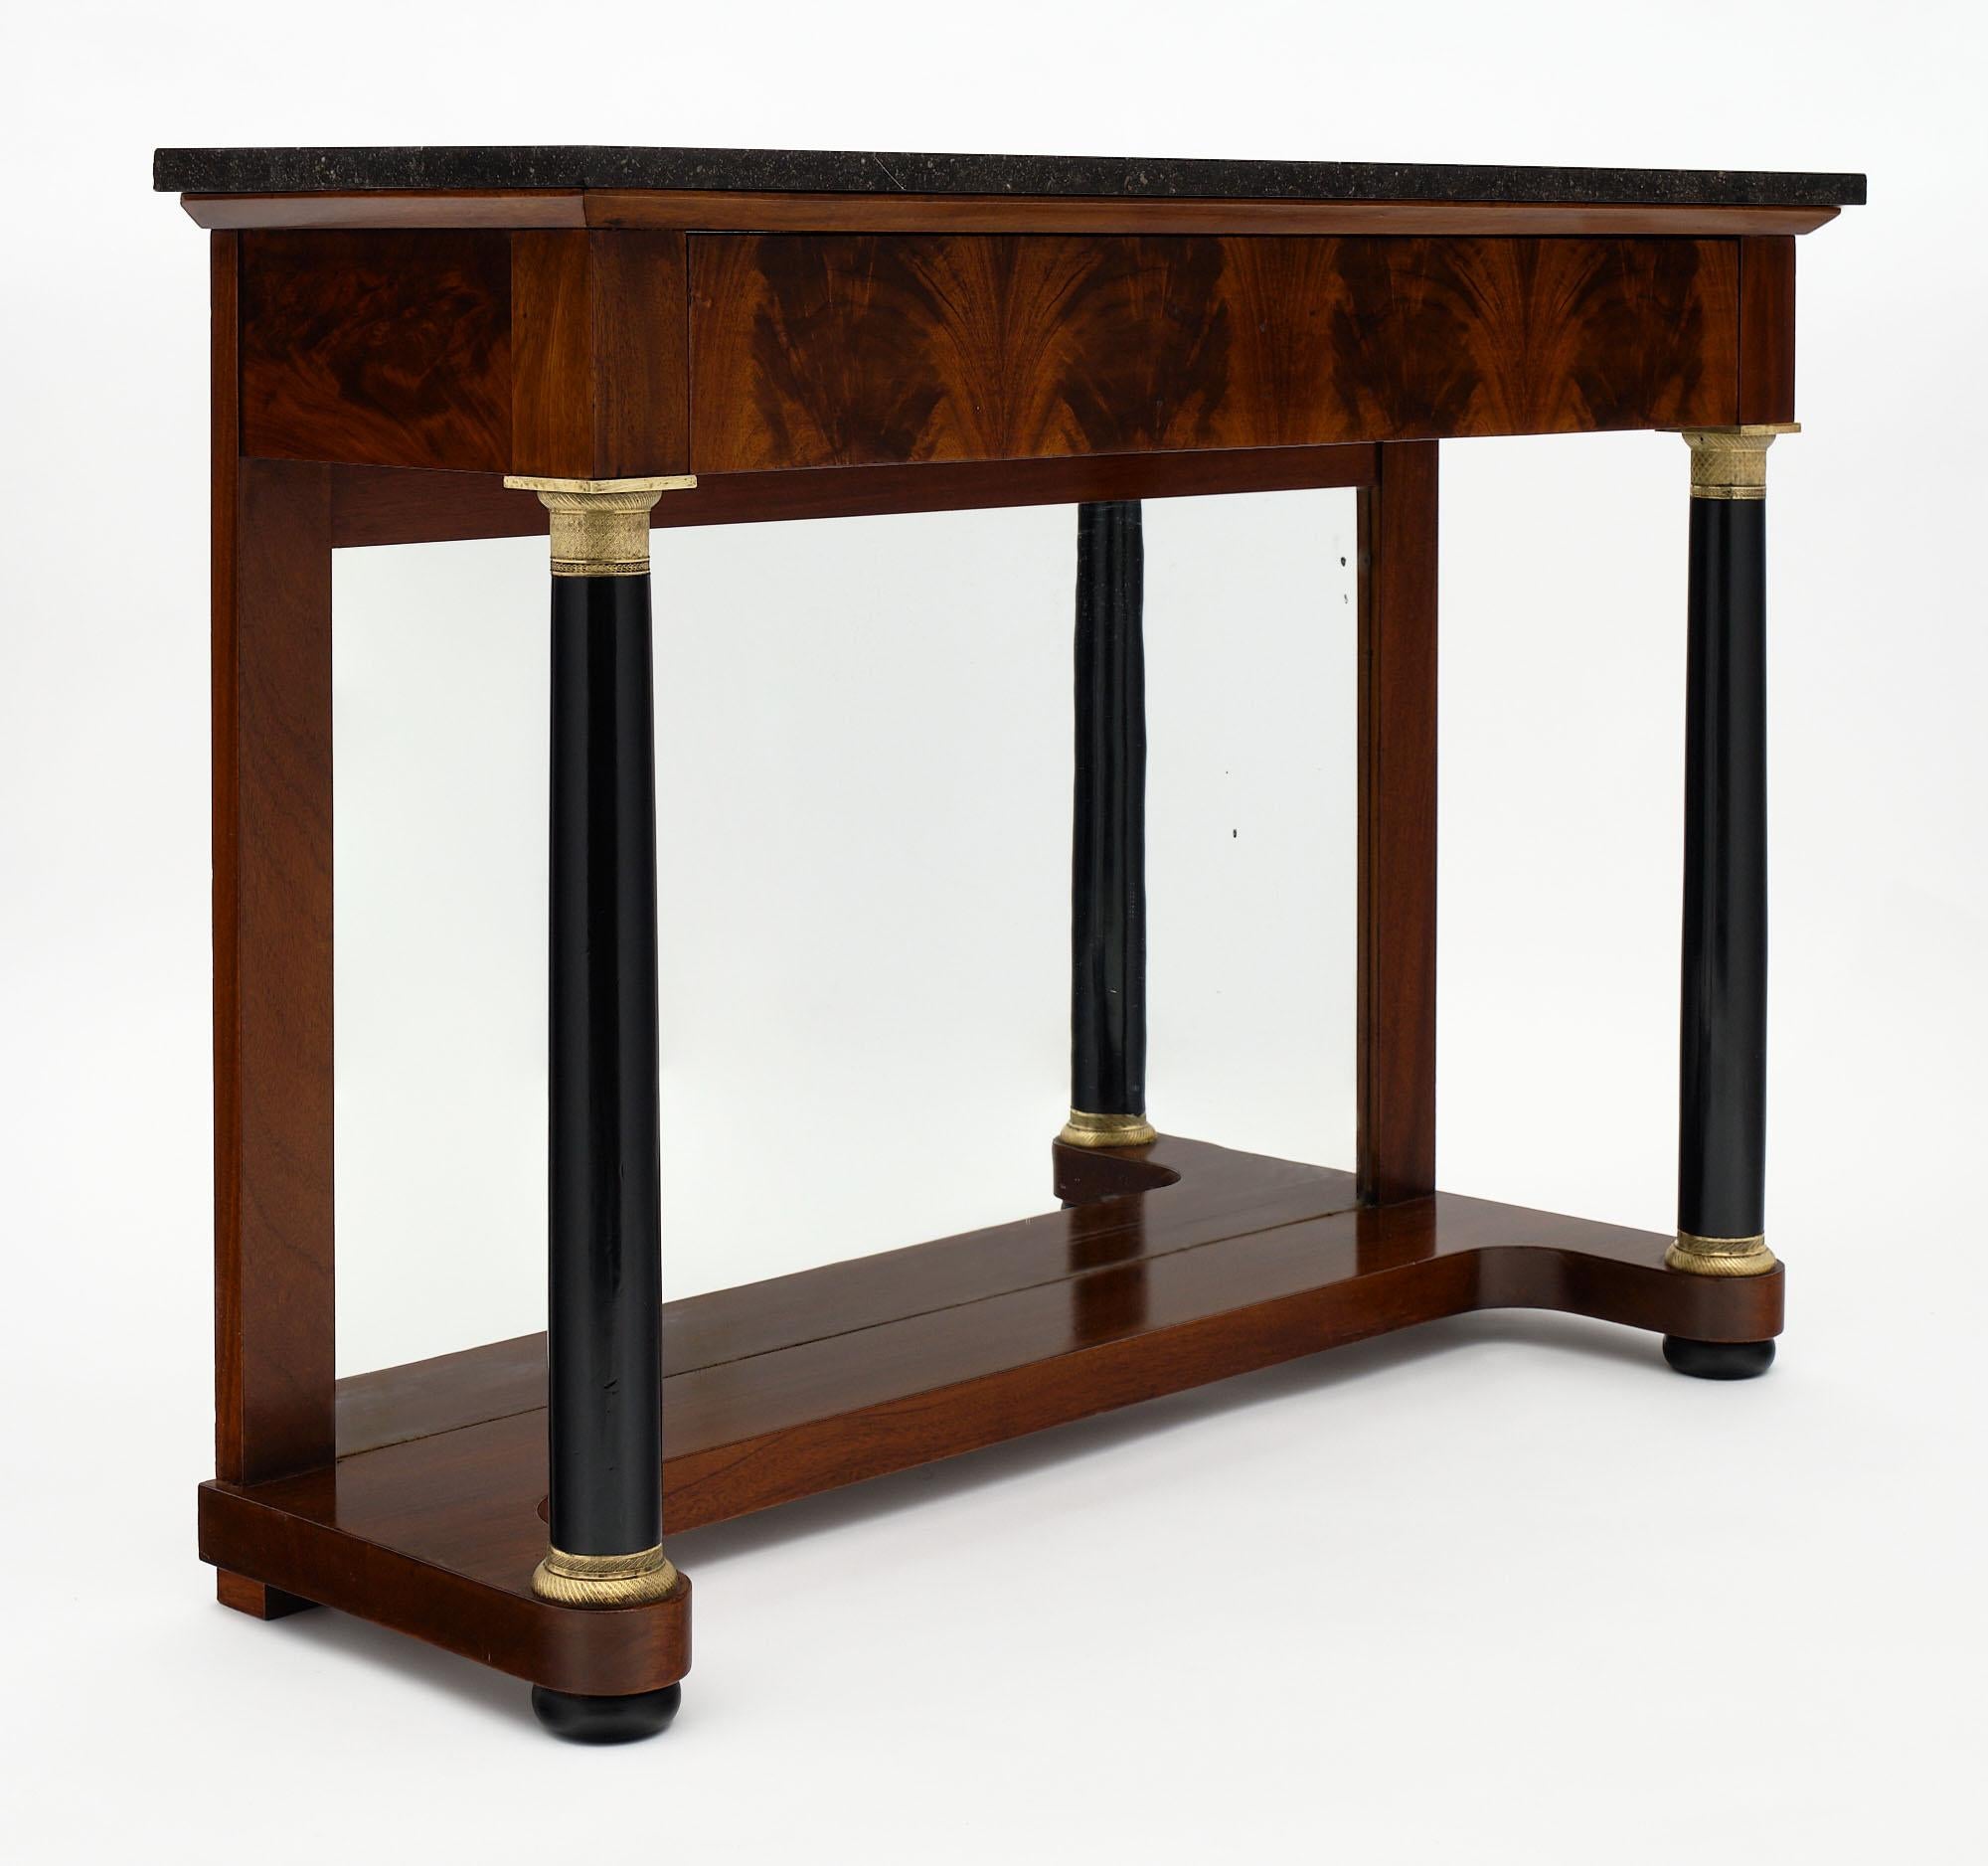 French antique Empire console table made of Cuban flamed mahogany and topped with a black marble slab. This elegant piece features a single drawer richly veneered and ebonized column legs with finely cast bronze ring ornamentation. There is also a